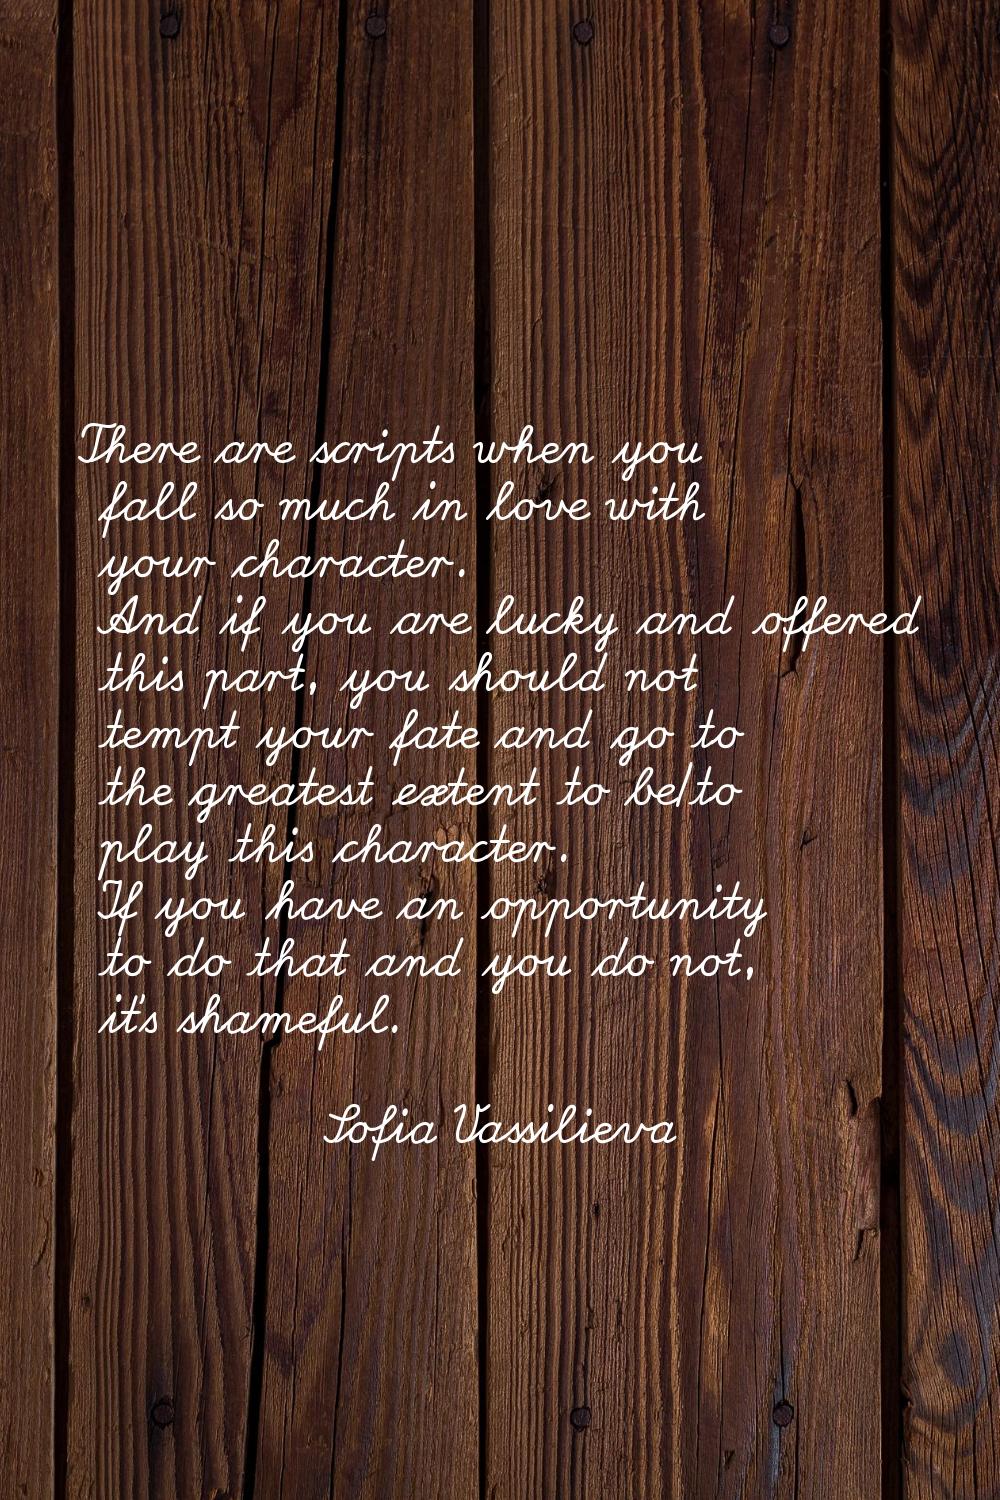 There are scripts when you fall so much in love with your character. And if you are lucky and offer